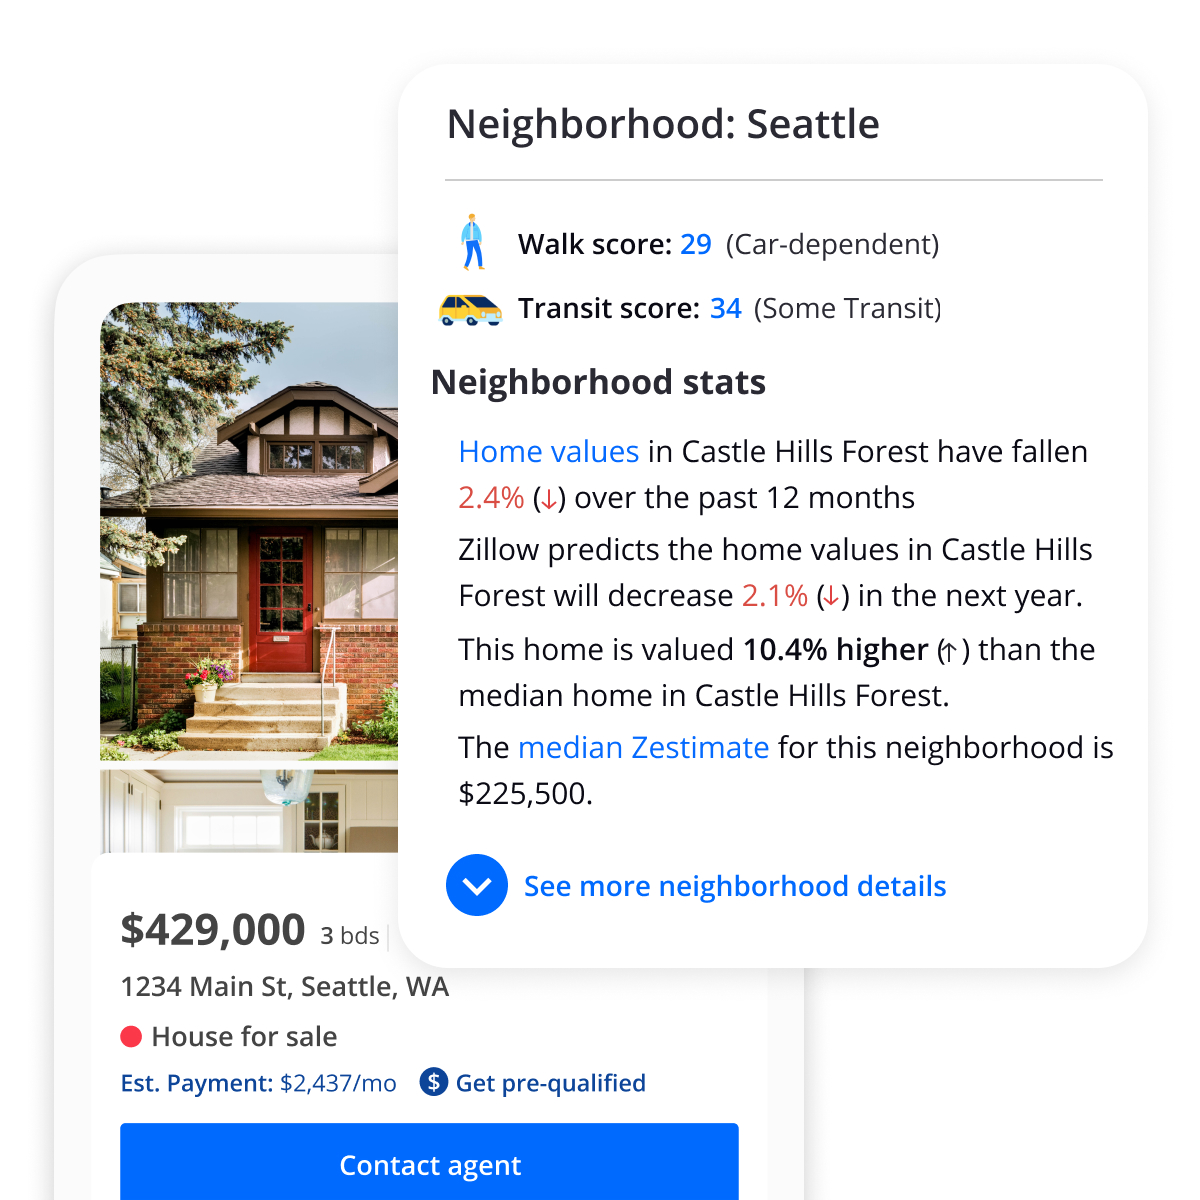 Use Zillow's home search tool to find out a neighborhood's walk score and estimate home values in the area.